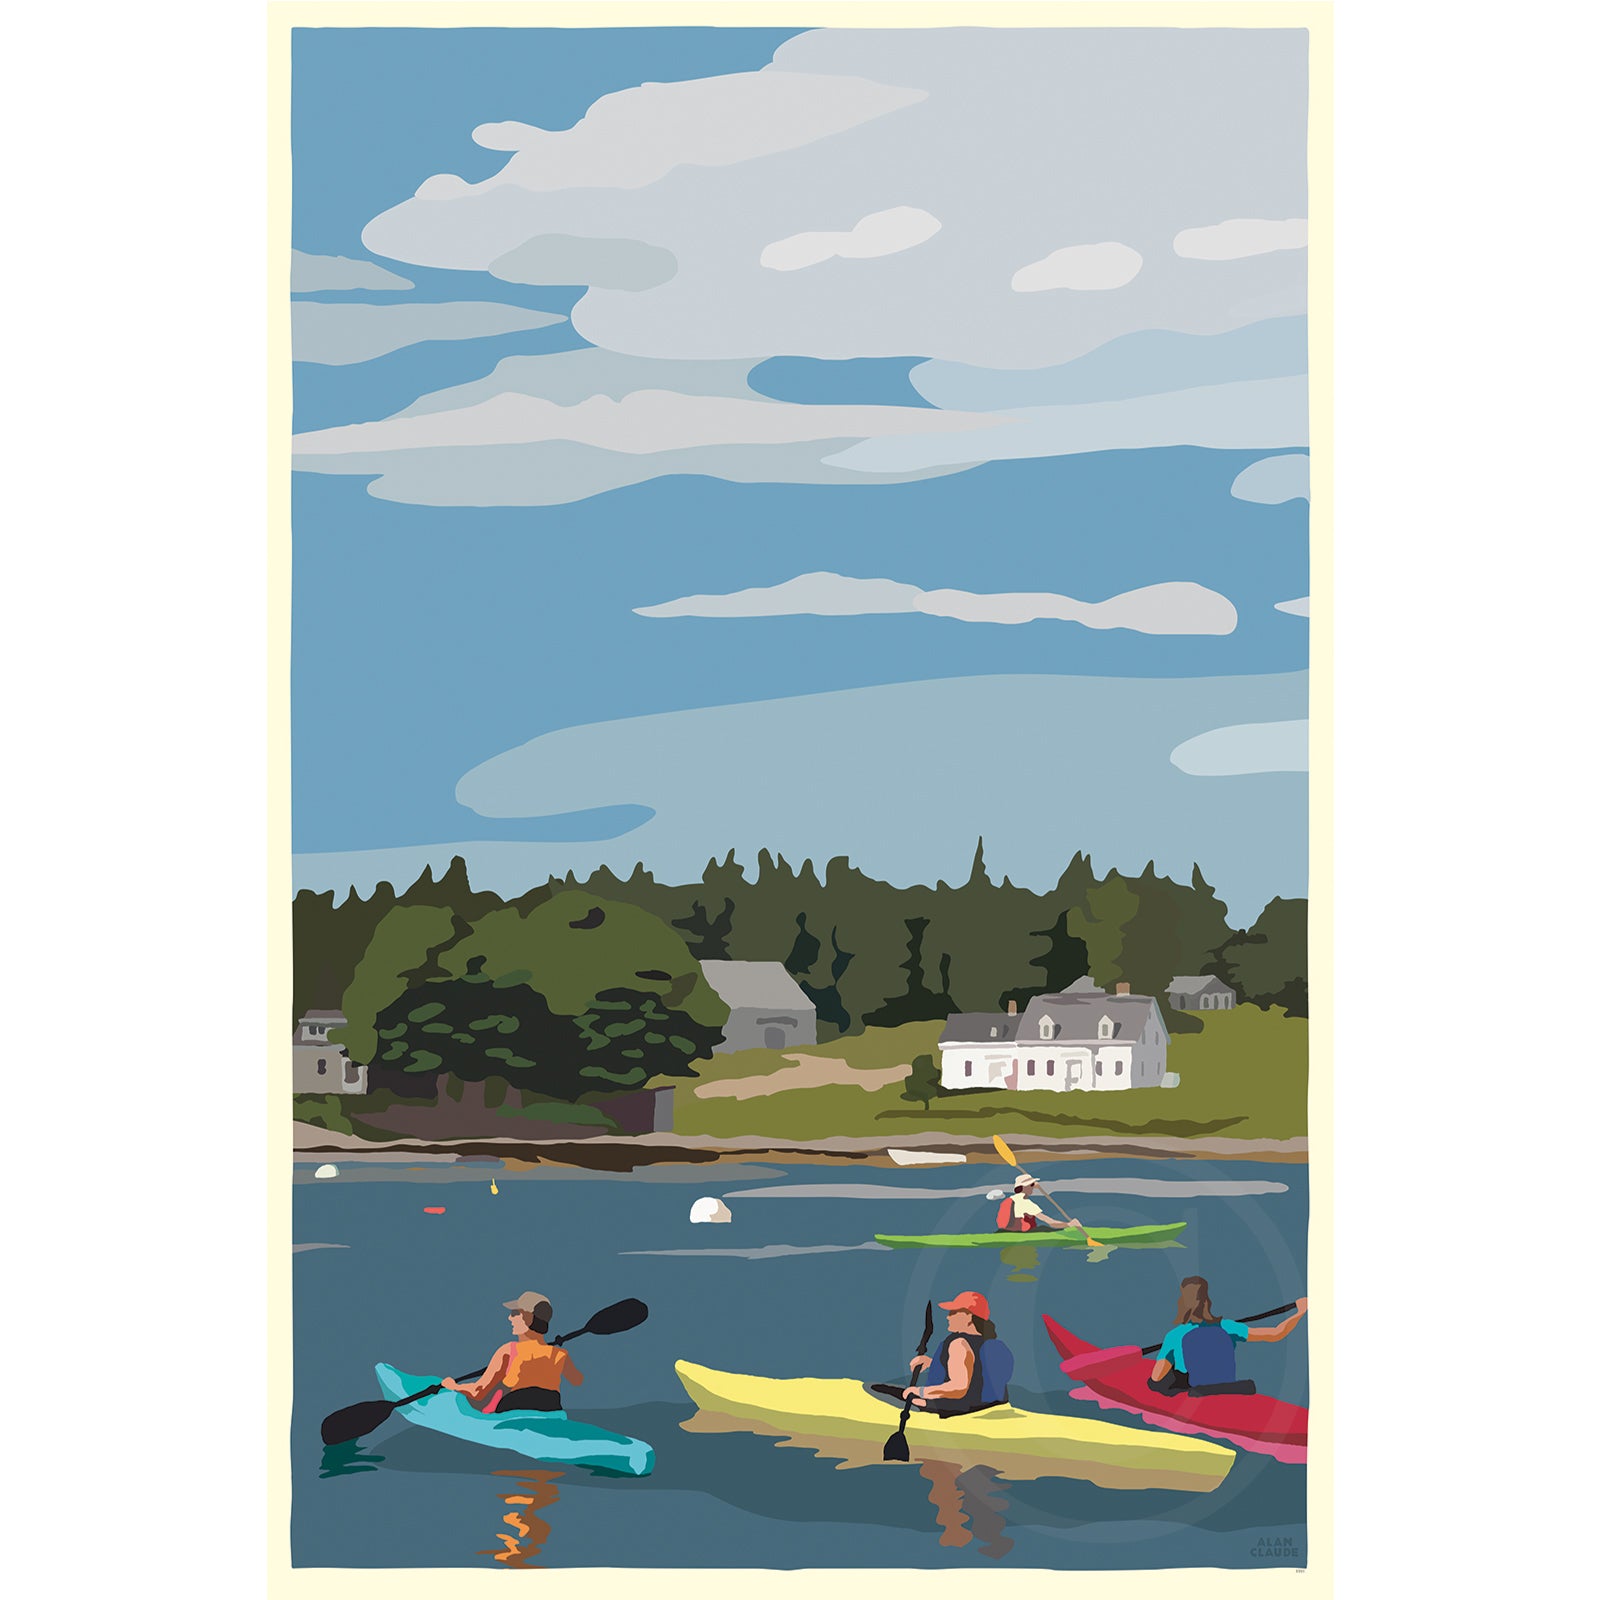 Kayaking in Port Clyde Art Print 24" x 36" Wall Poster By Alan Claude - Maine